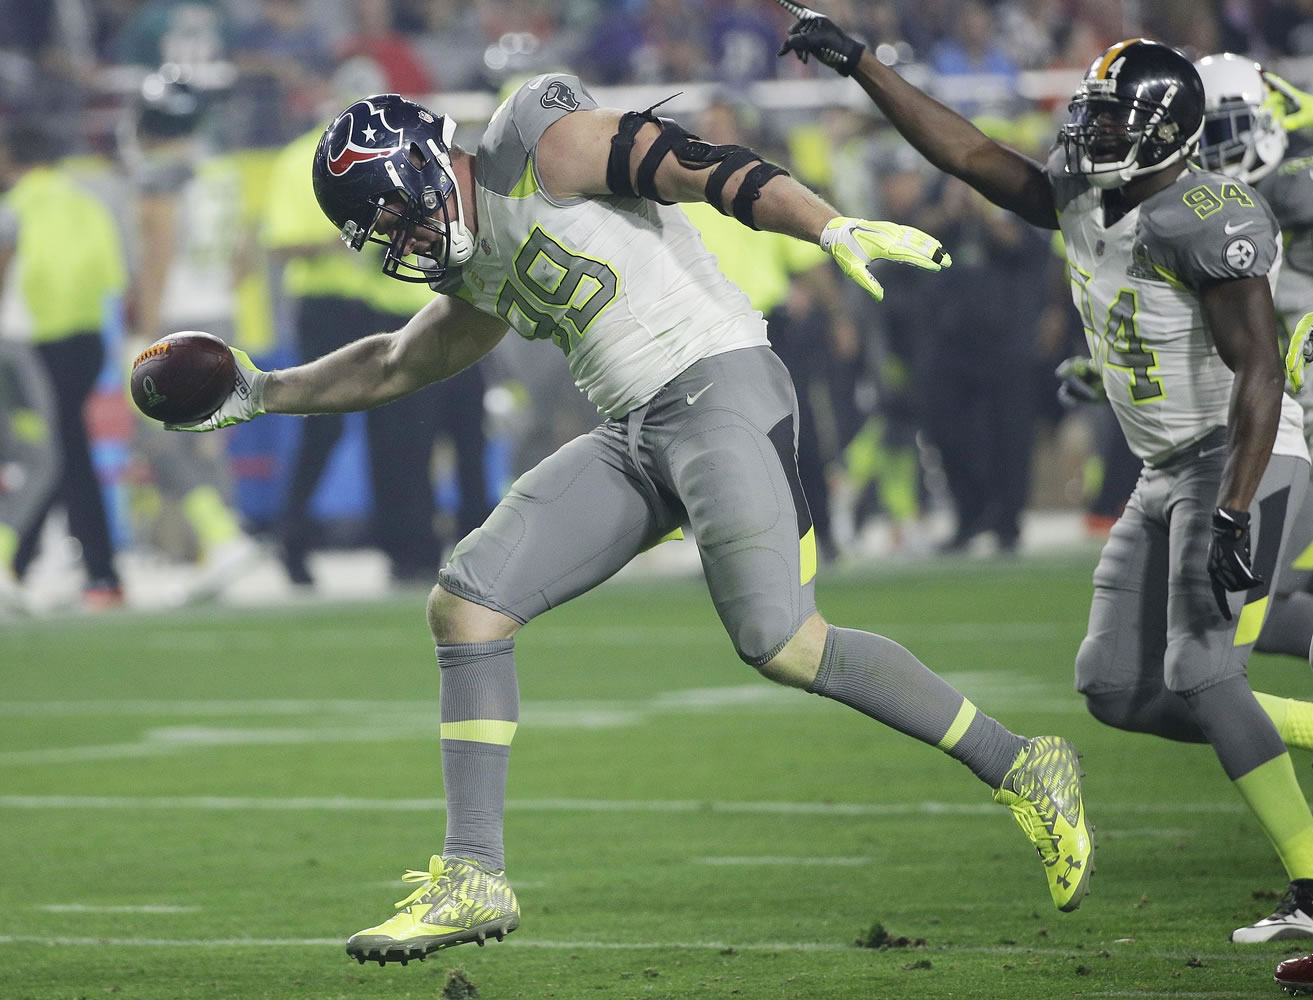 Houston Texans' J.J. Watt (99) celebrates after recovering a fumble during the second half of the NFL Pro Bowl on Sunday, Jan. 25, 2015, in Glendale, Ariz. (AP Photo/David J.